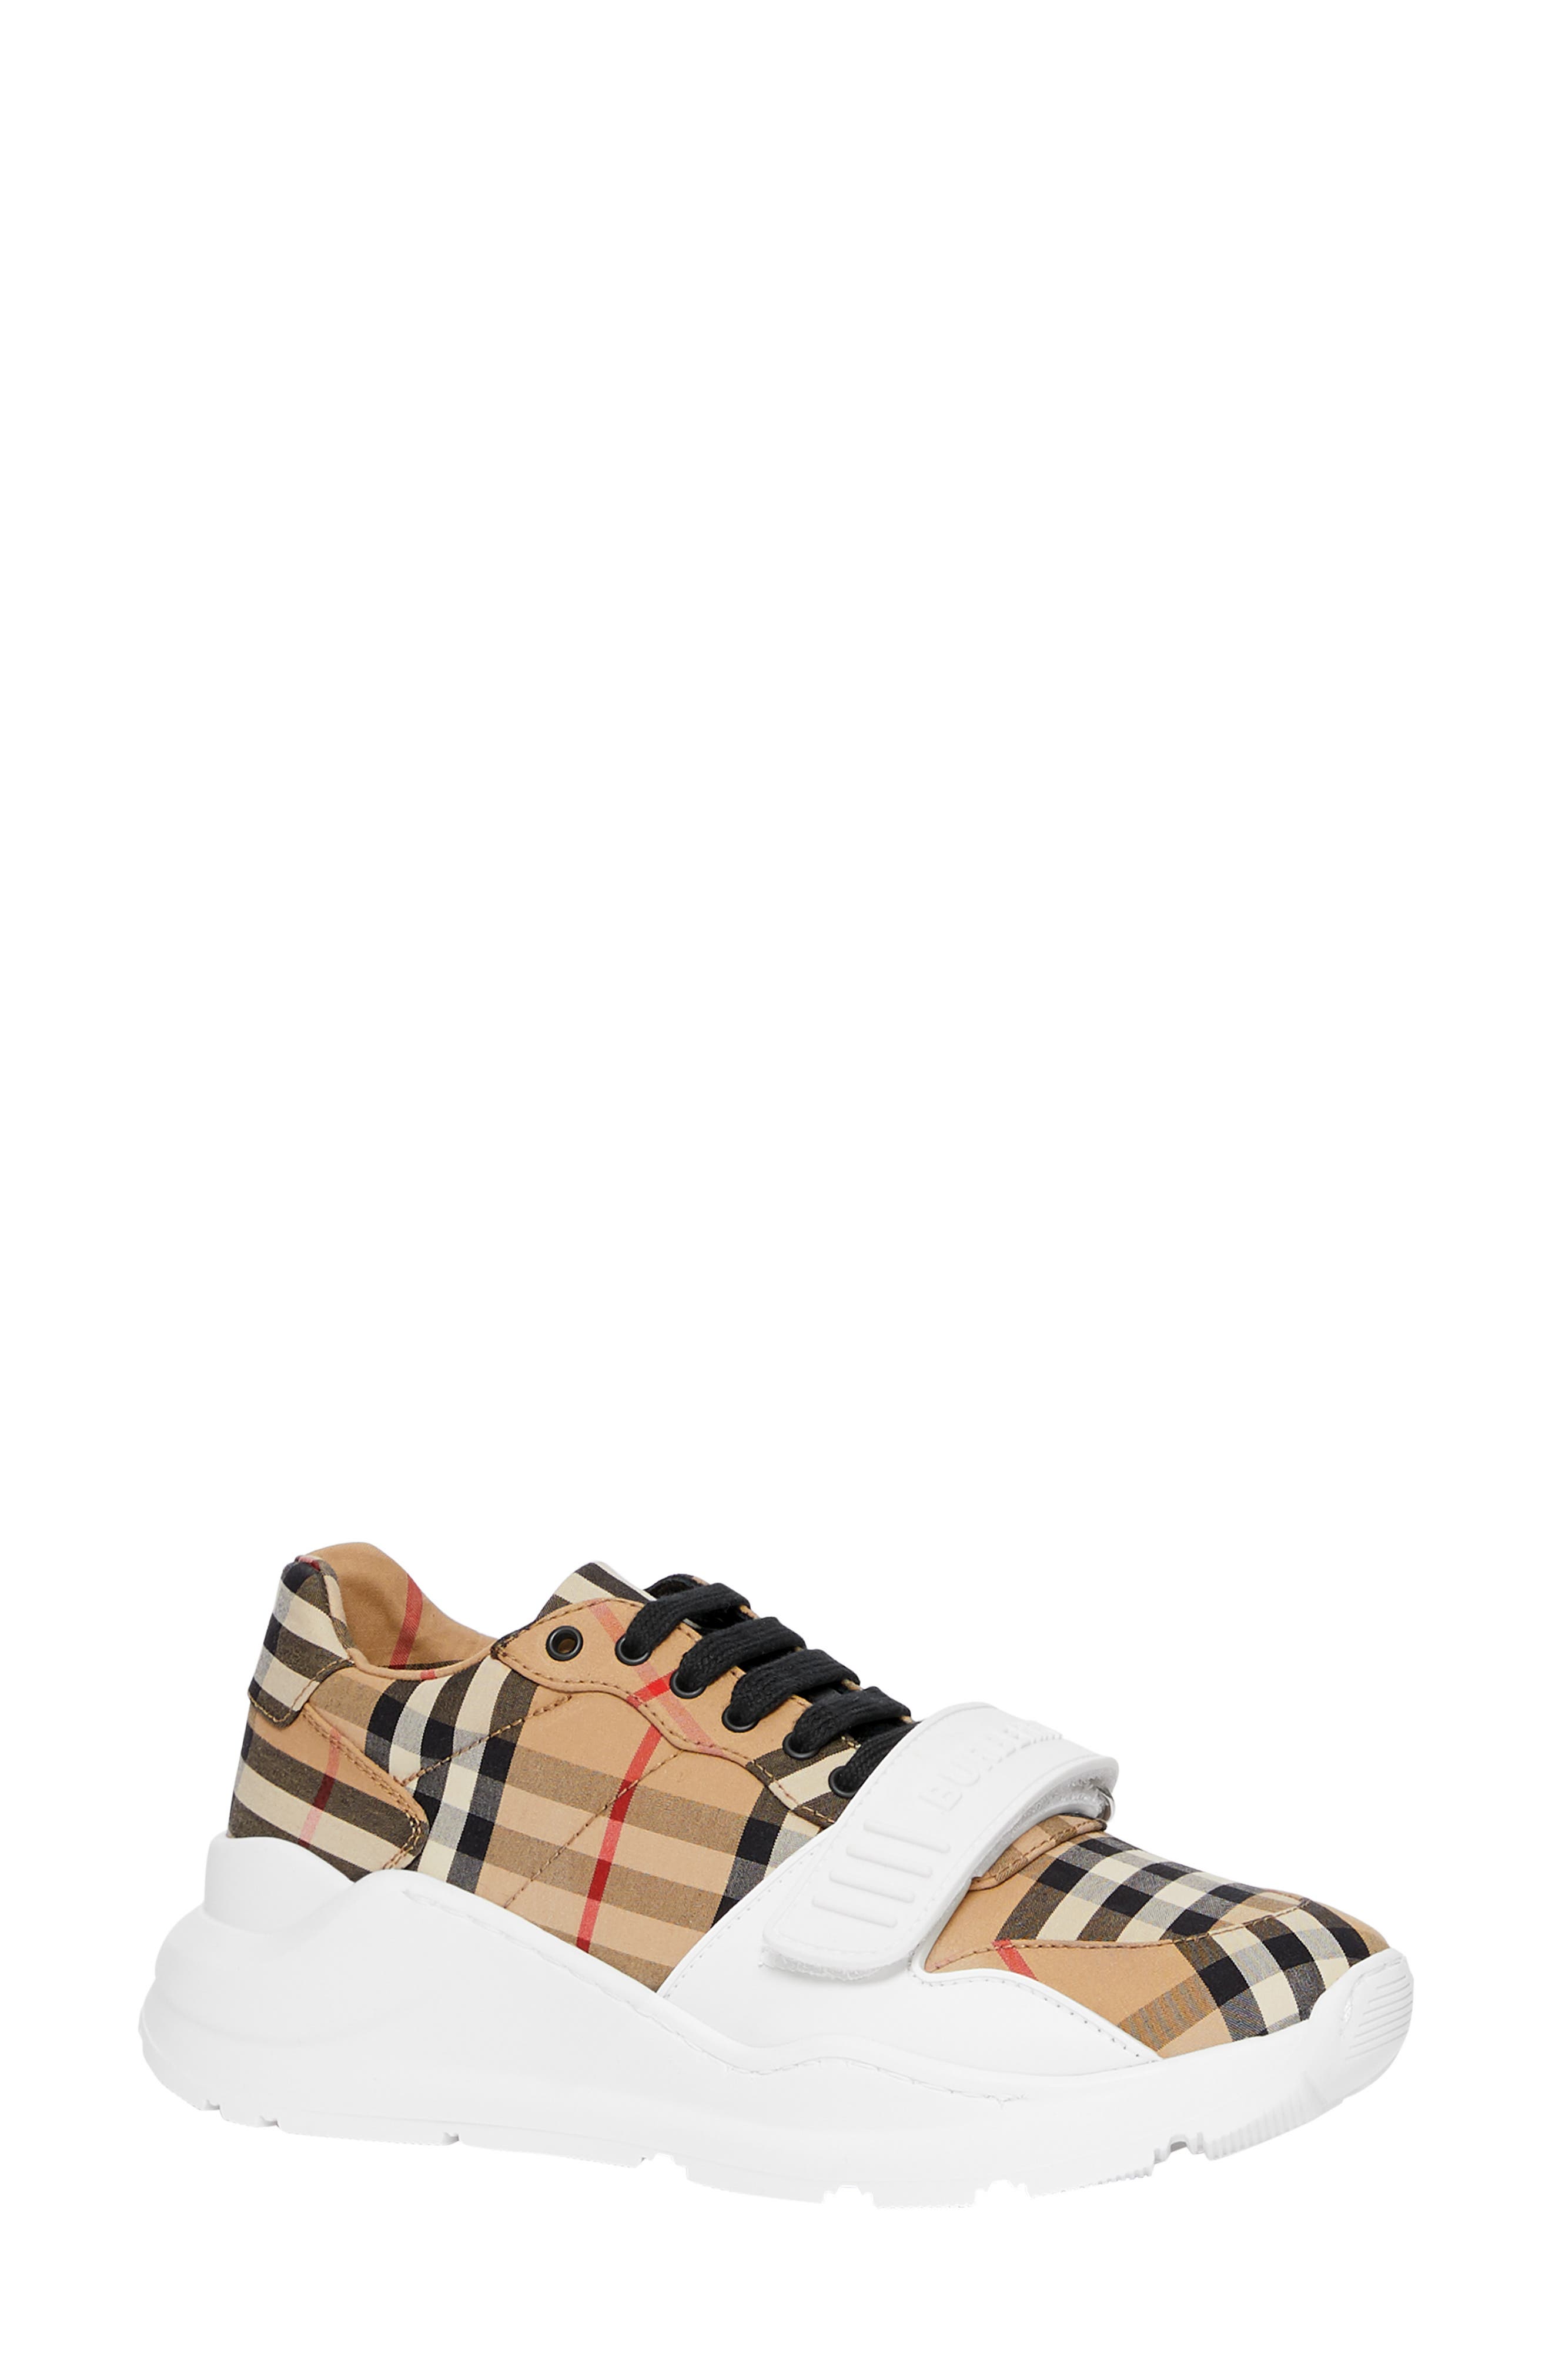 burberry sneakers for women